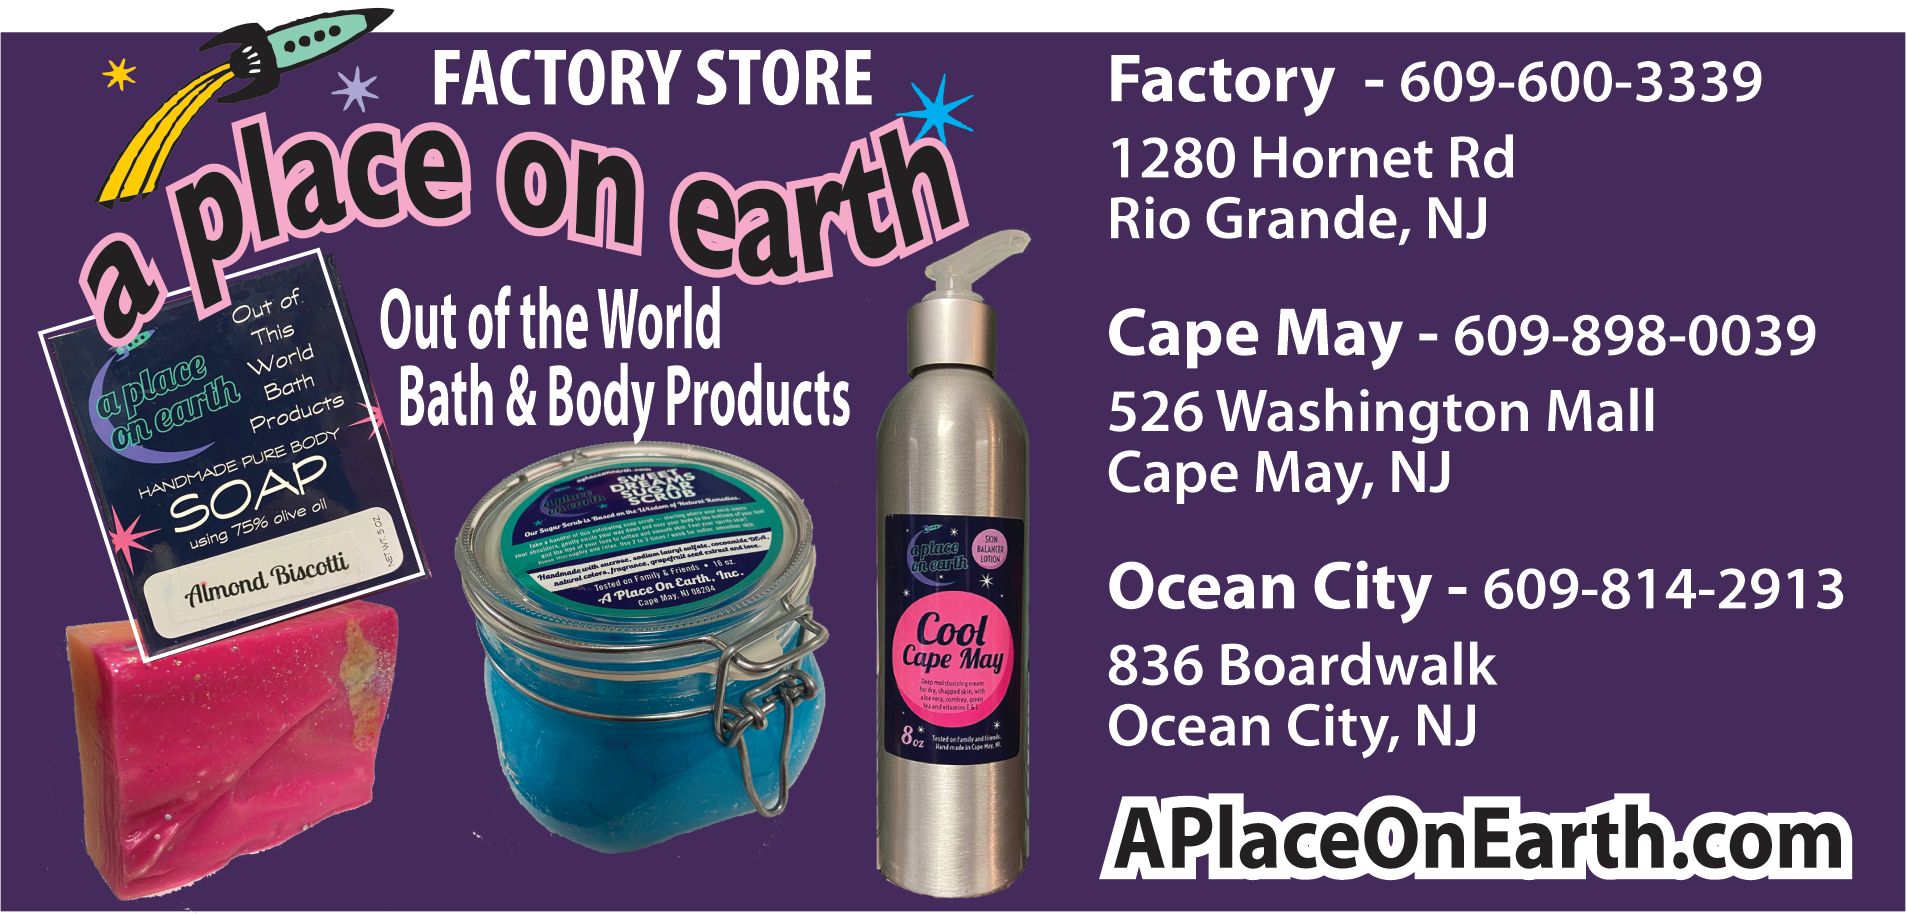 A Place on Earth Soap Factory Store Print Ad